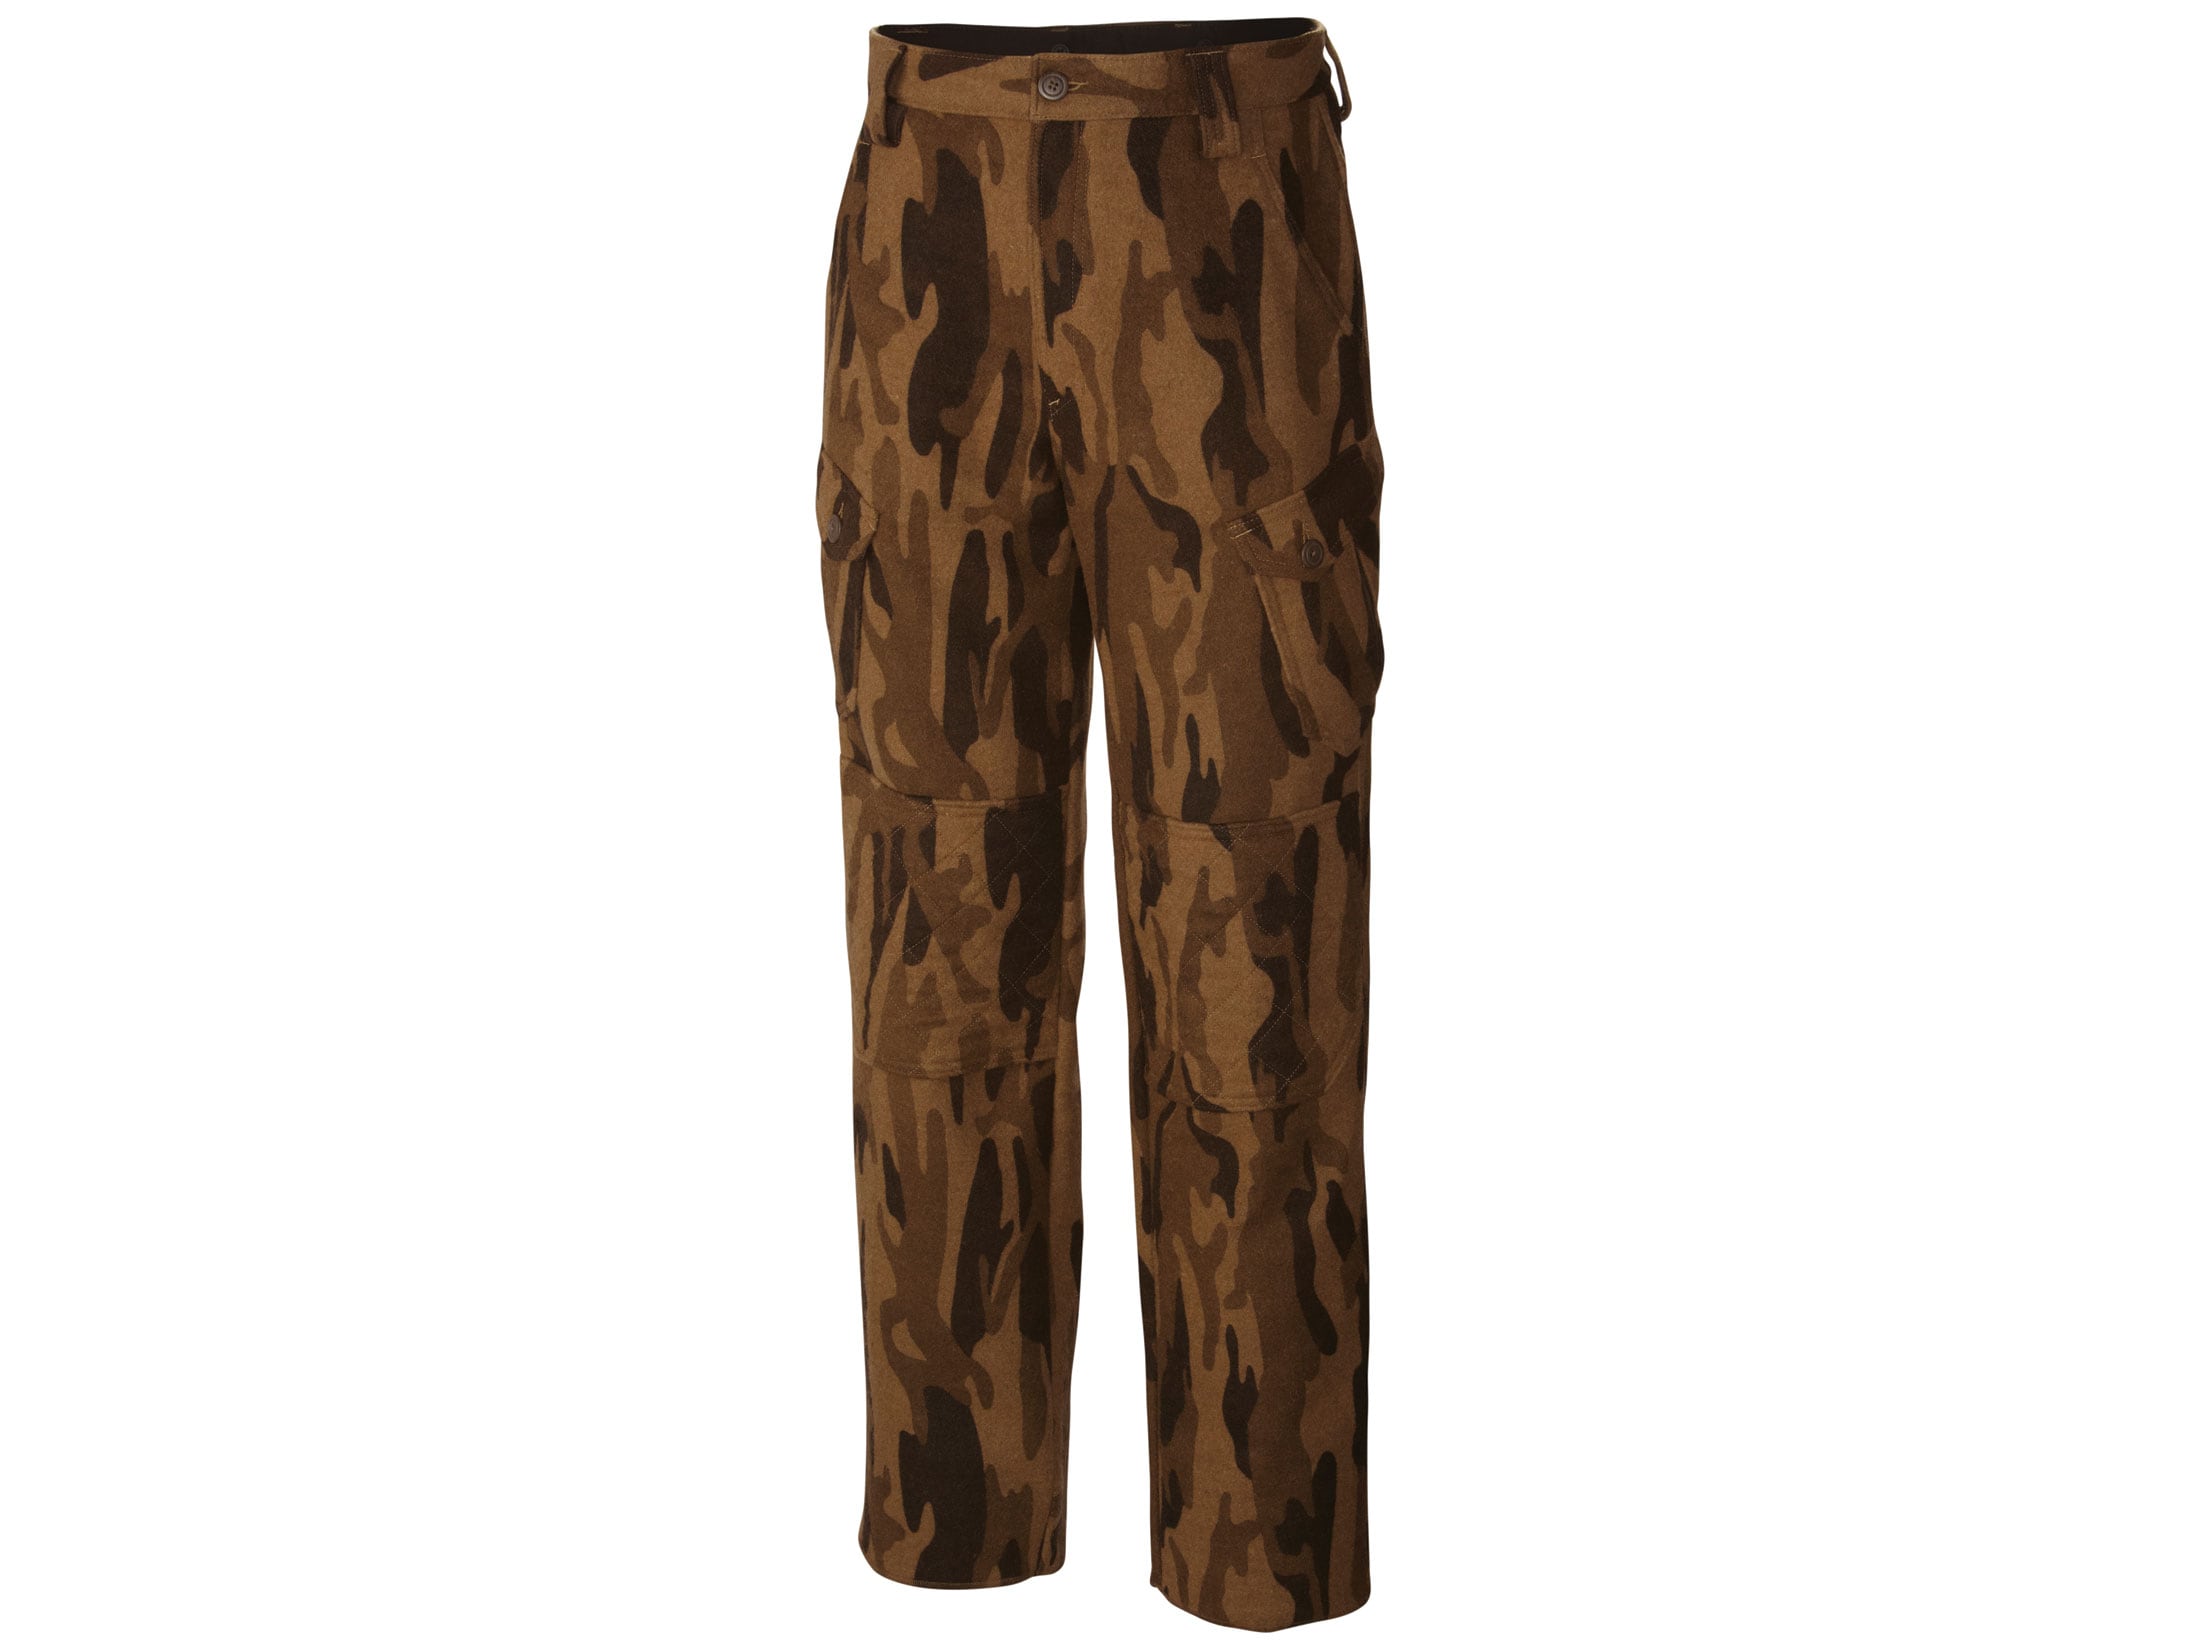 insulated wool pants